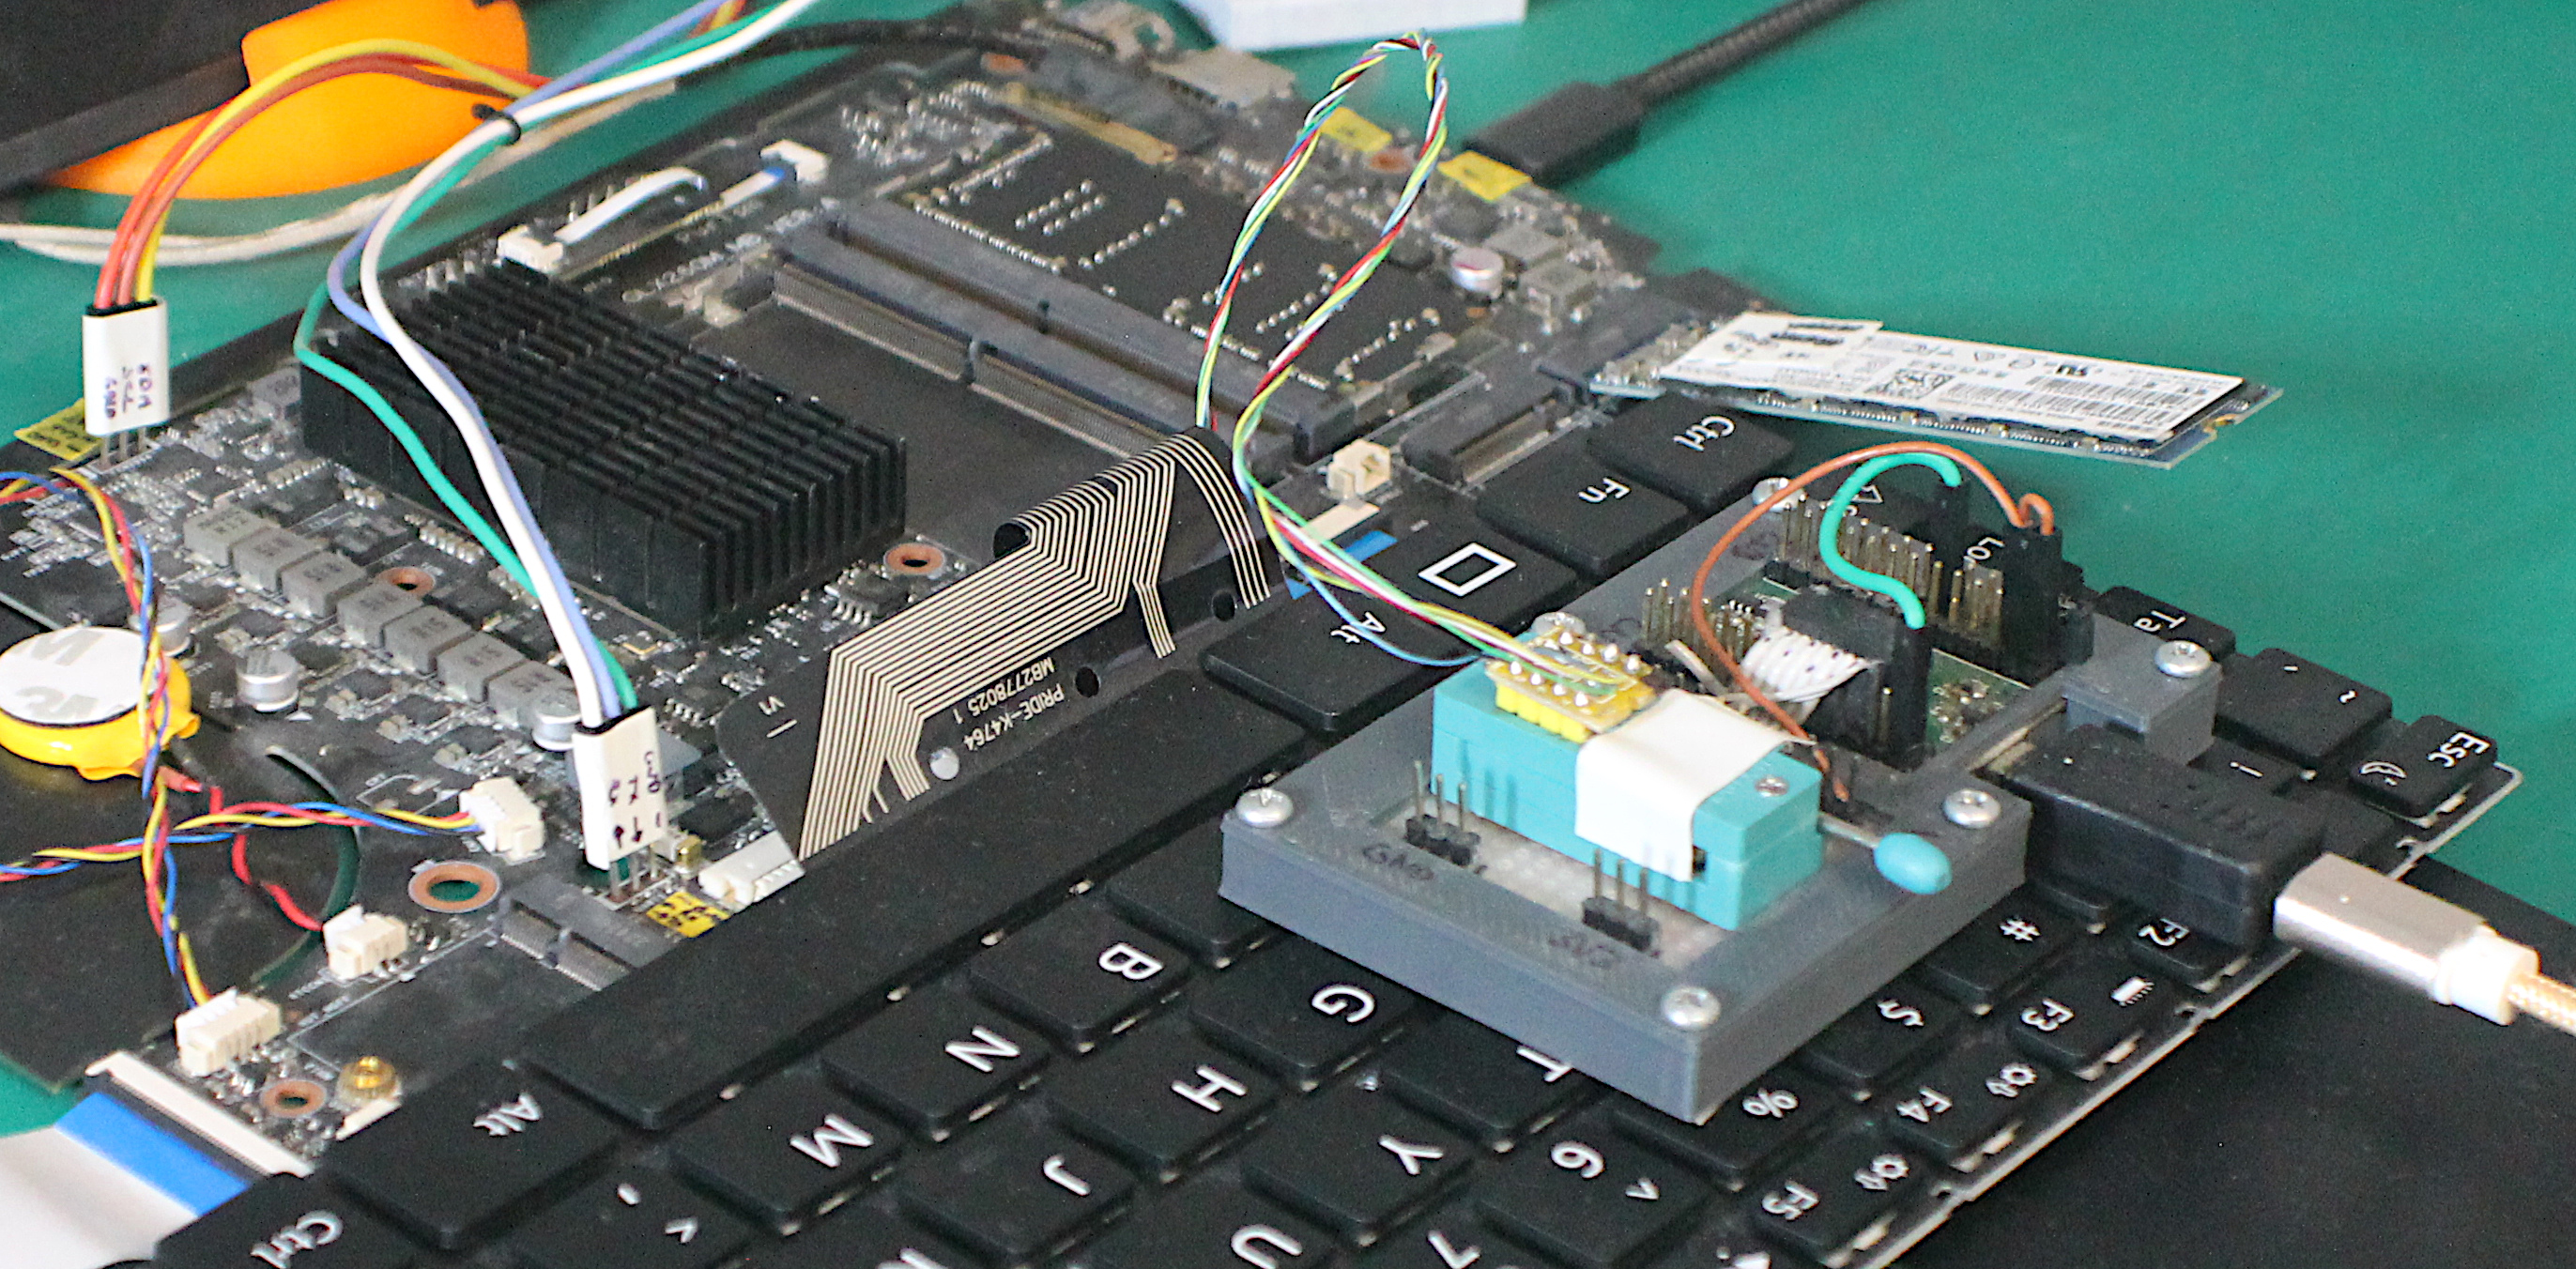 Photo of Librem 16 development board, with EC I2C and UART debugging connectors, and flash cable connected to BIOS flash